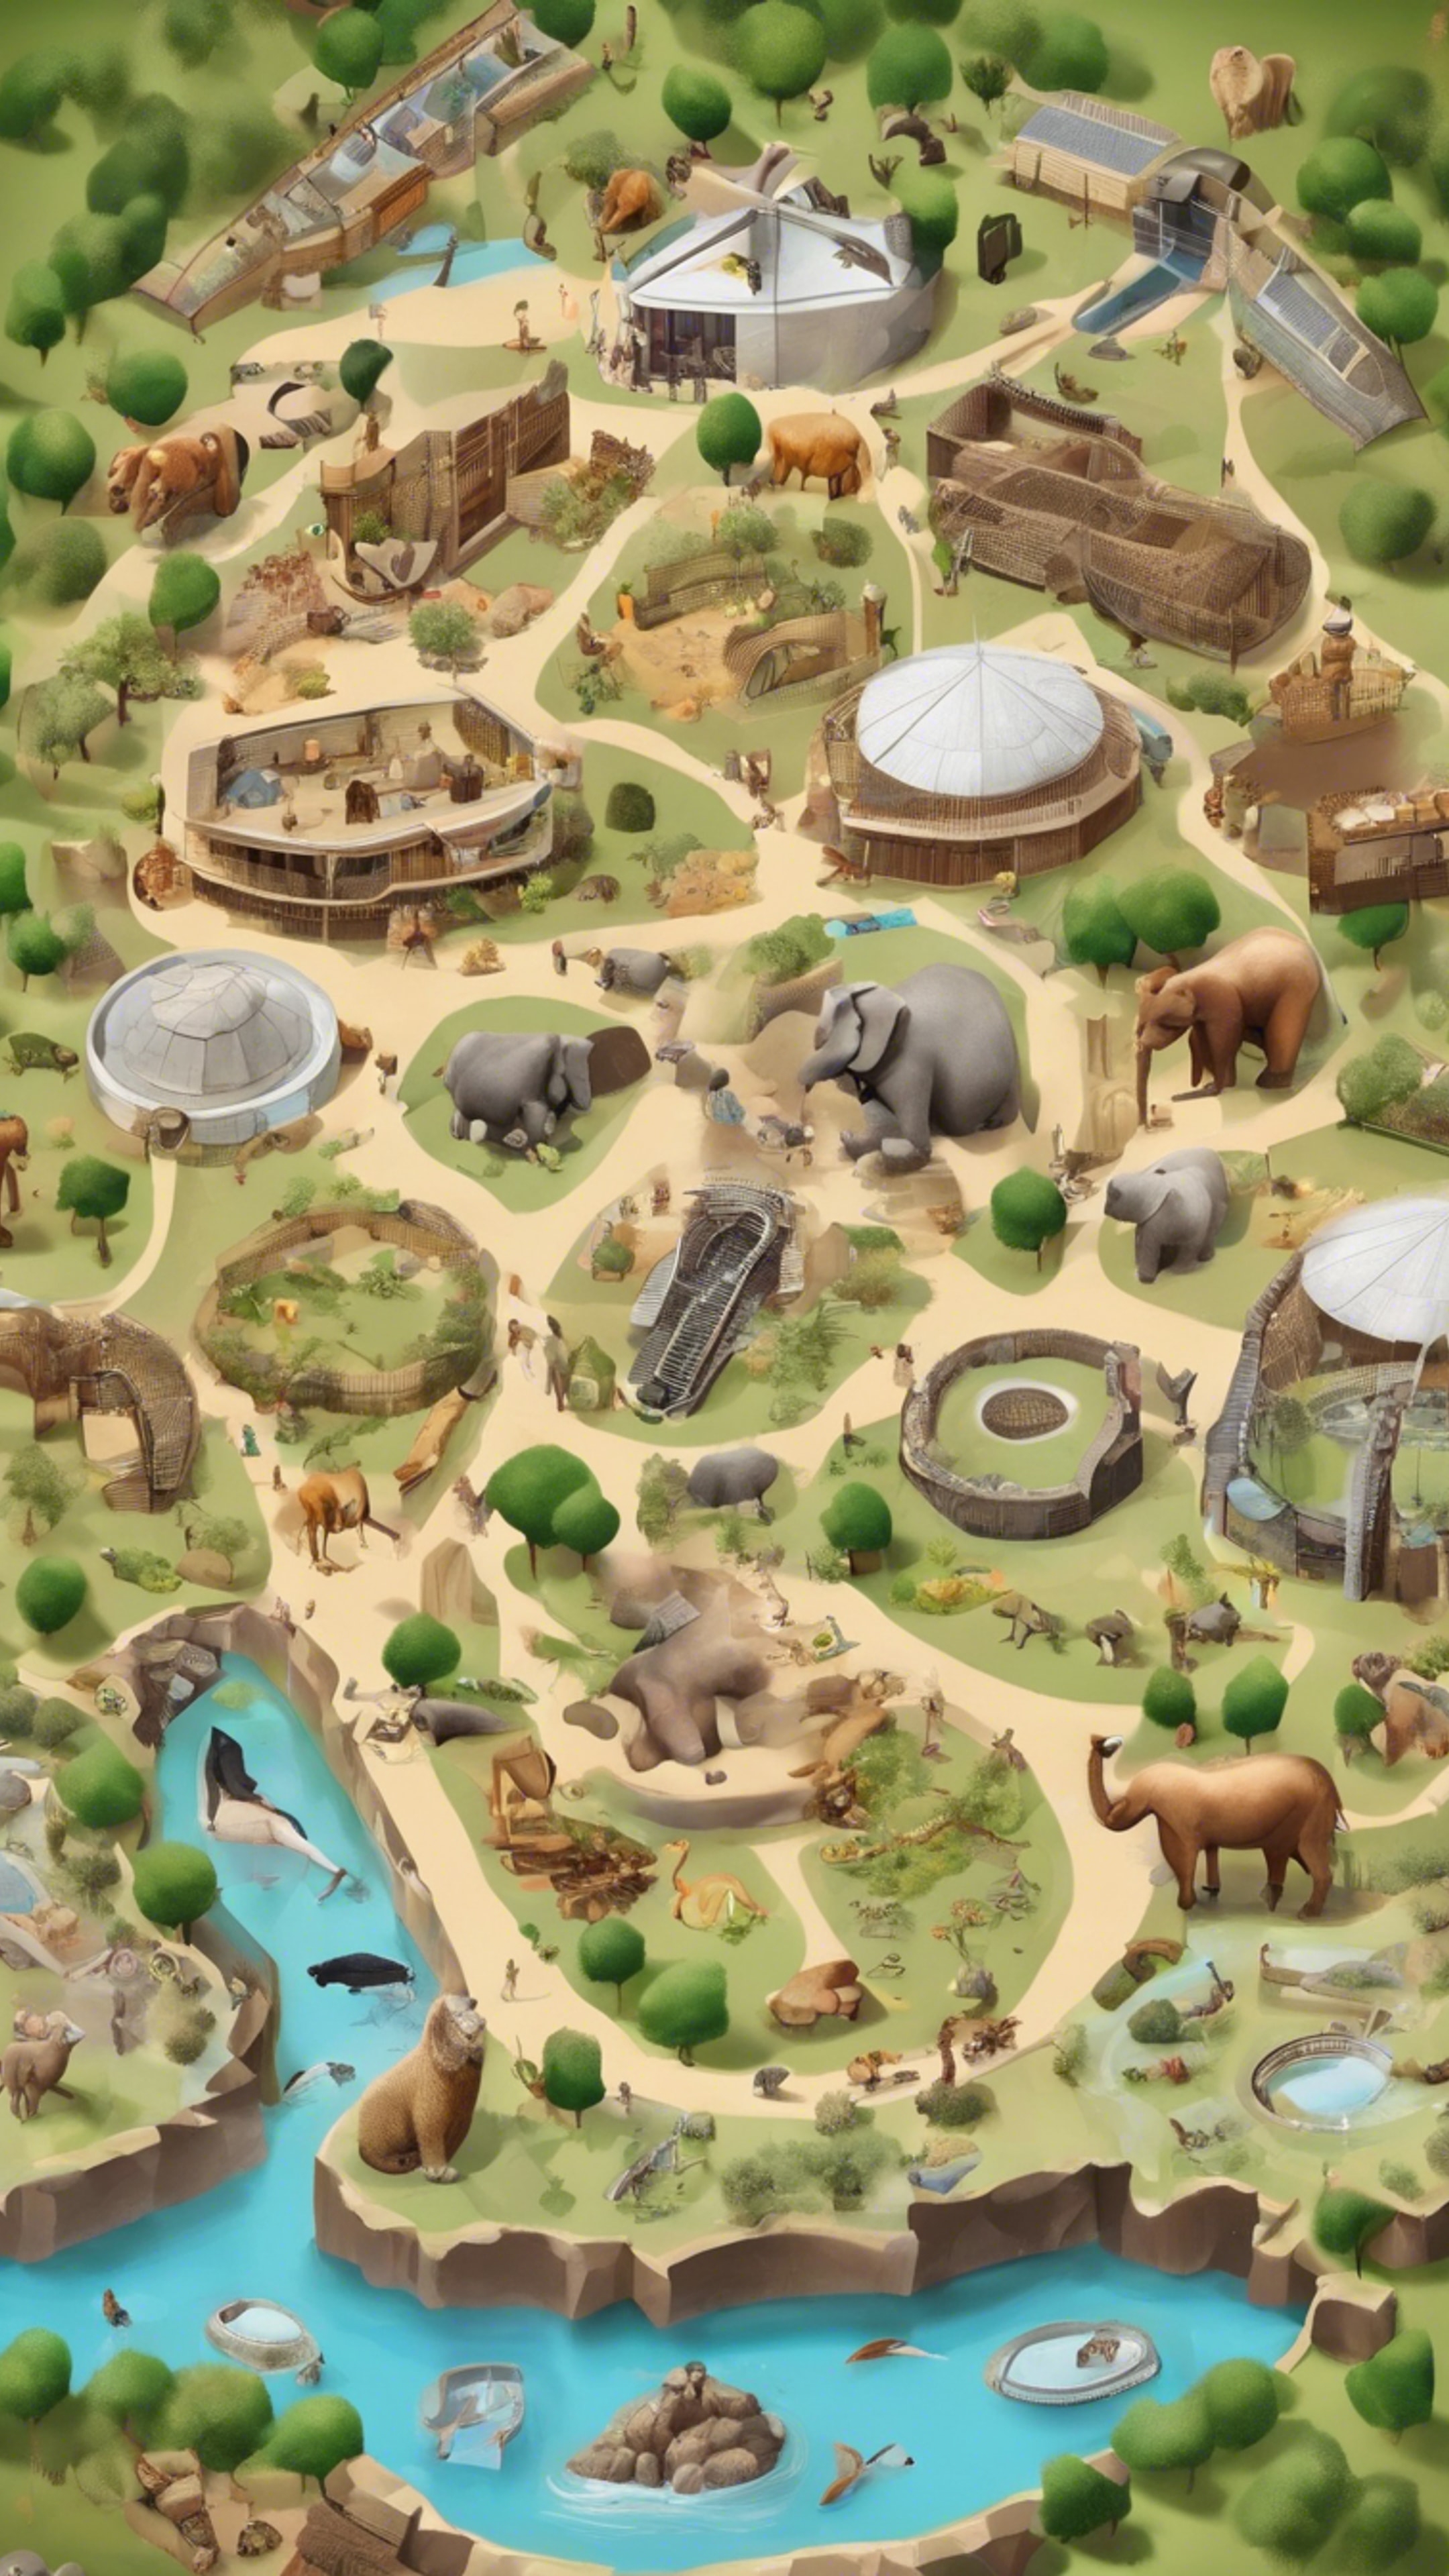 A graphic map of a zoo, with different animal enclosures, food stalls and amenities. Тапет[7d3ed7eed3f244f7a17f]